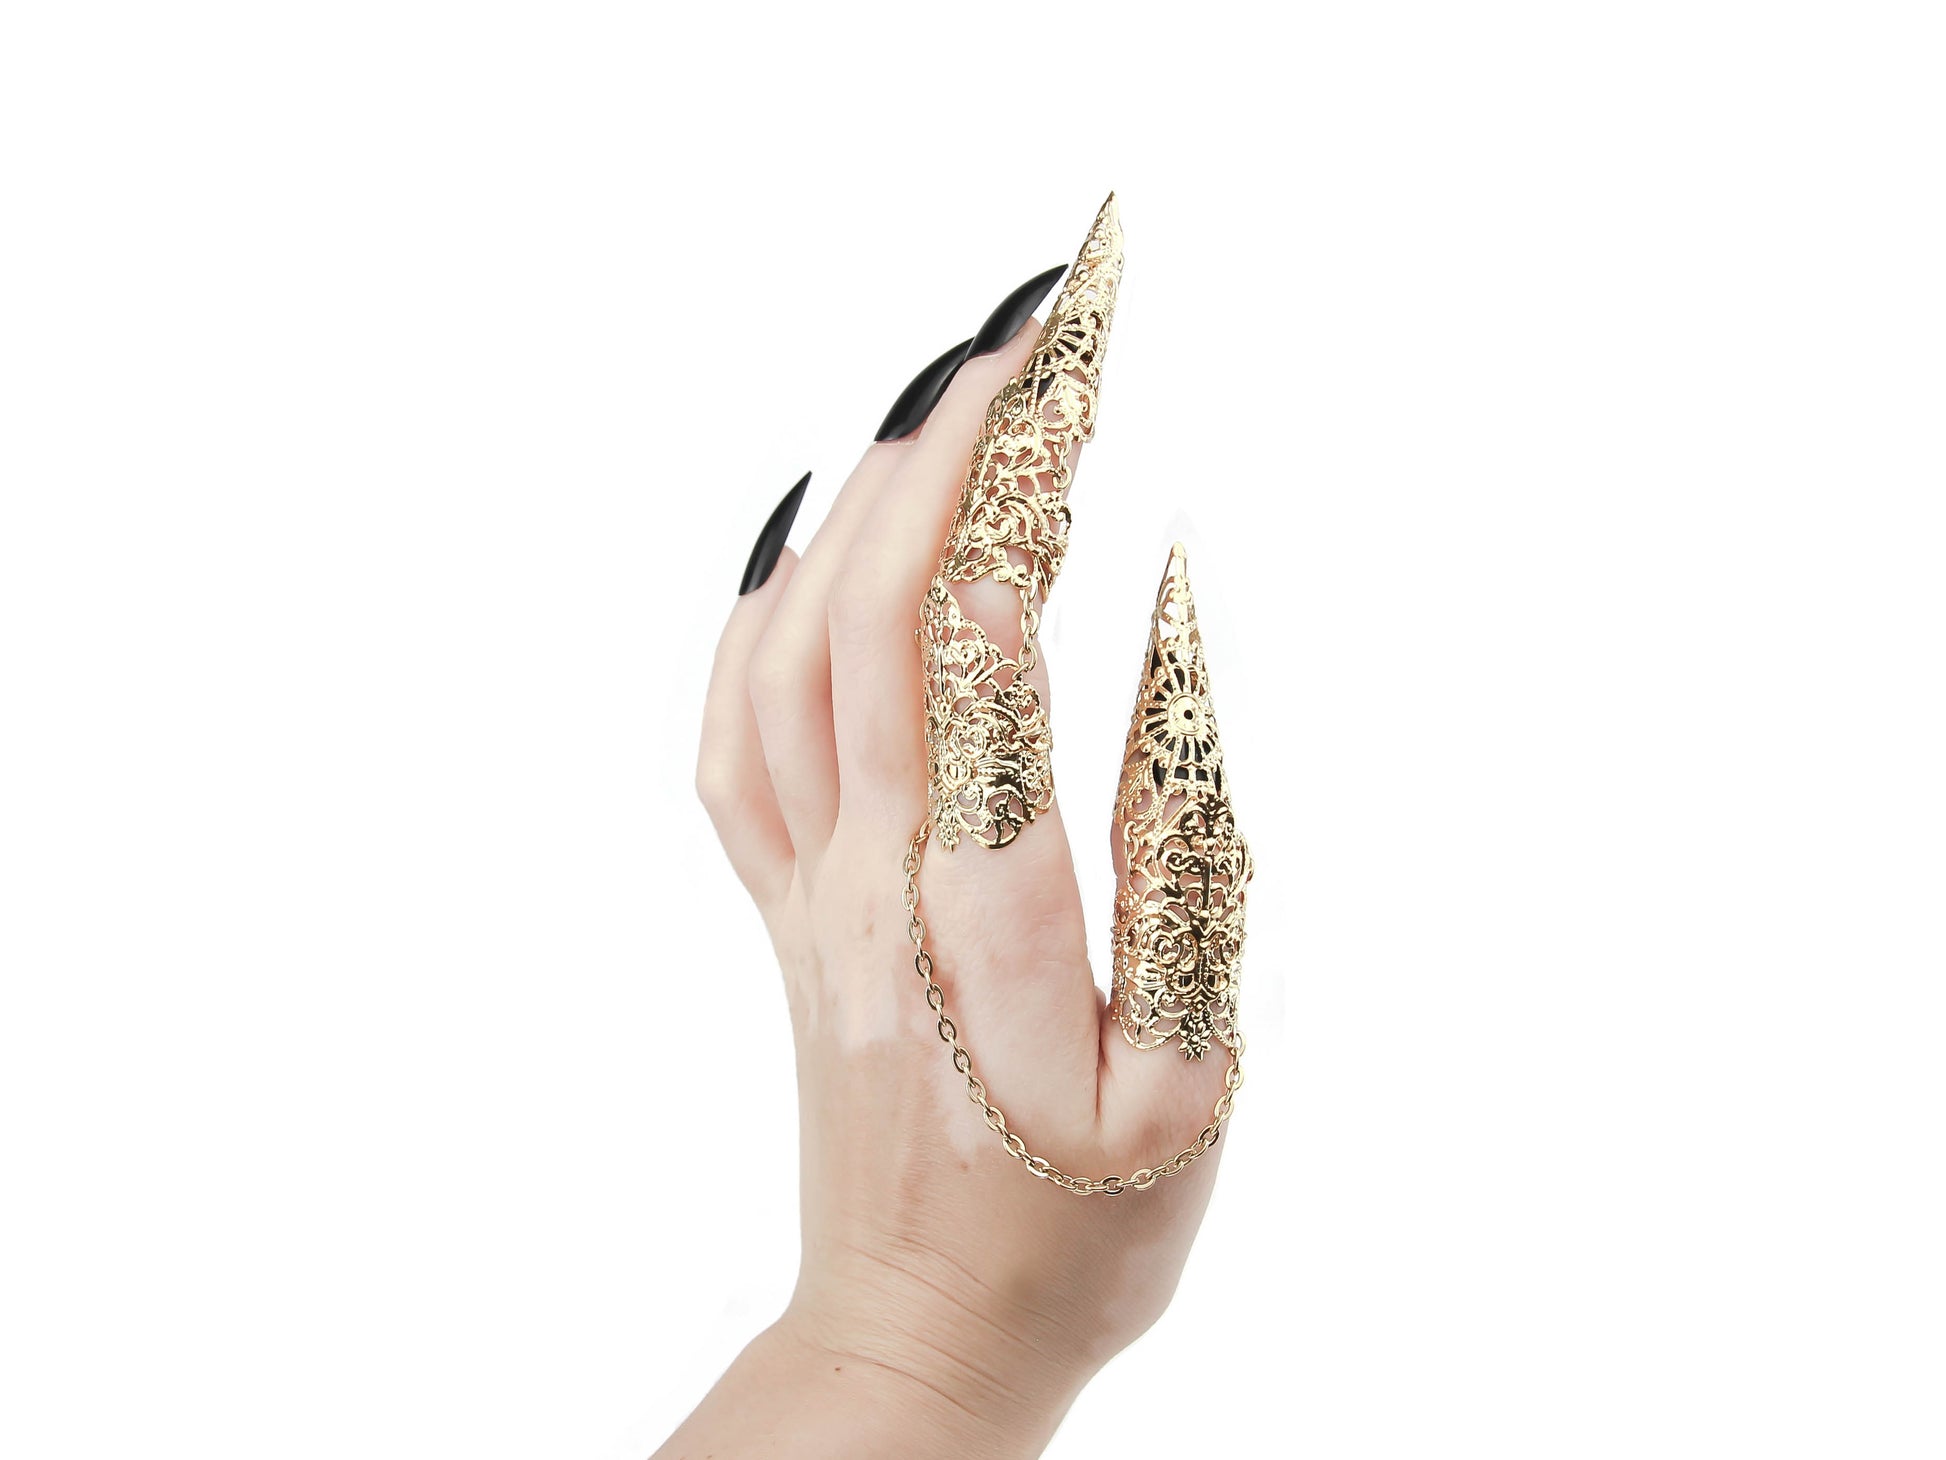 A hand showcases Myril Jewels' gothic full-finger double rings, extending into intricate claw designs over each fingertip. The gold claw rings are connected by delicate chains, exemplifying neo-goth jewelry craftsmanship. This statement piece is perfect for those seeking a dark, avant-garde accessory, suitable for Halloween, punk fashion, or to add a touch of gothic-chic to any outfit, epitomizing the edgy essence of Myril Jewels